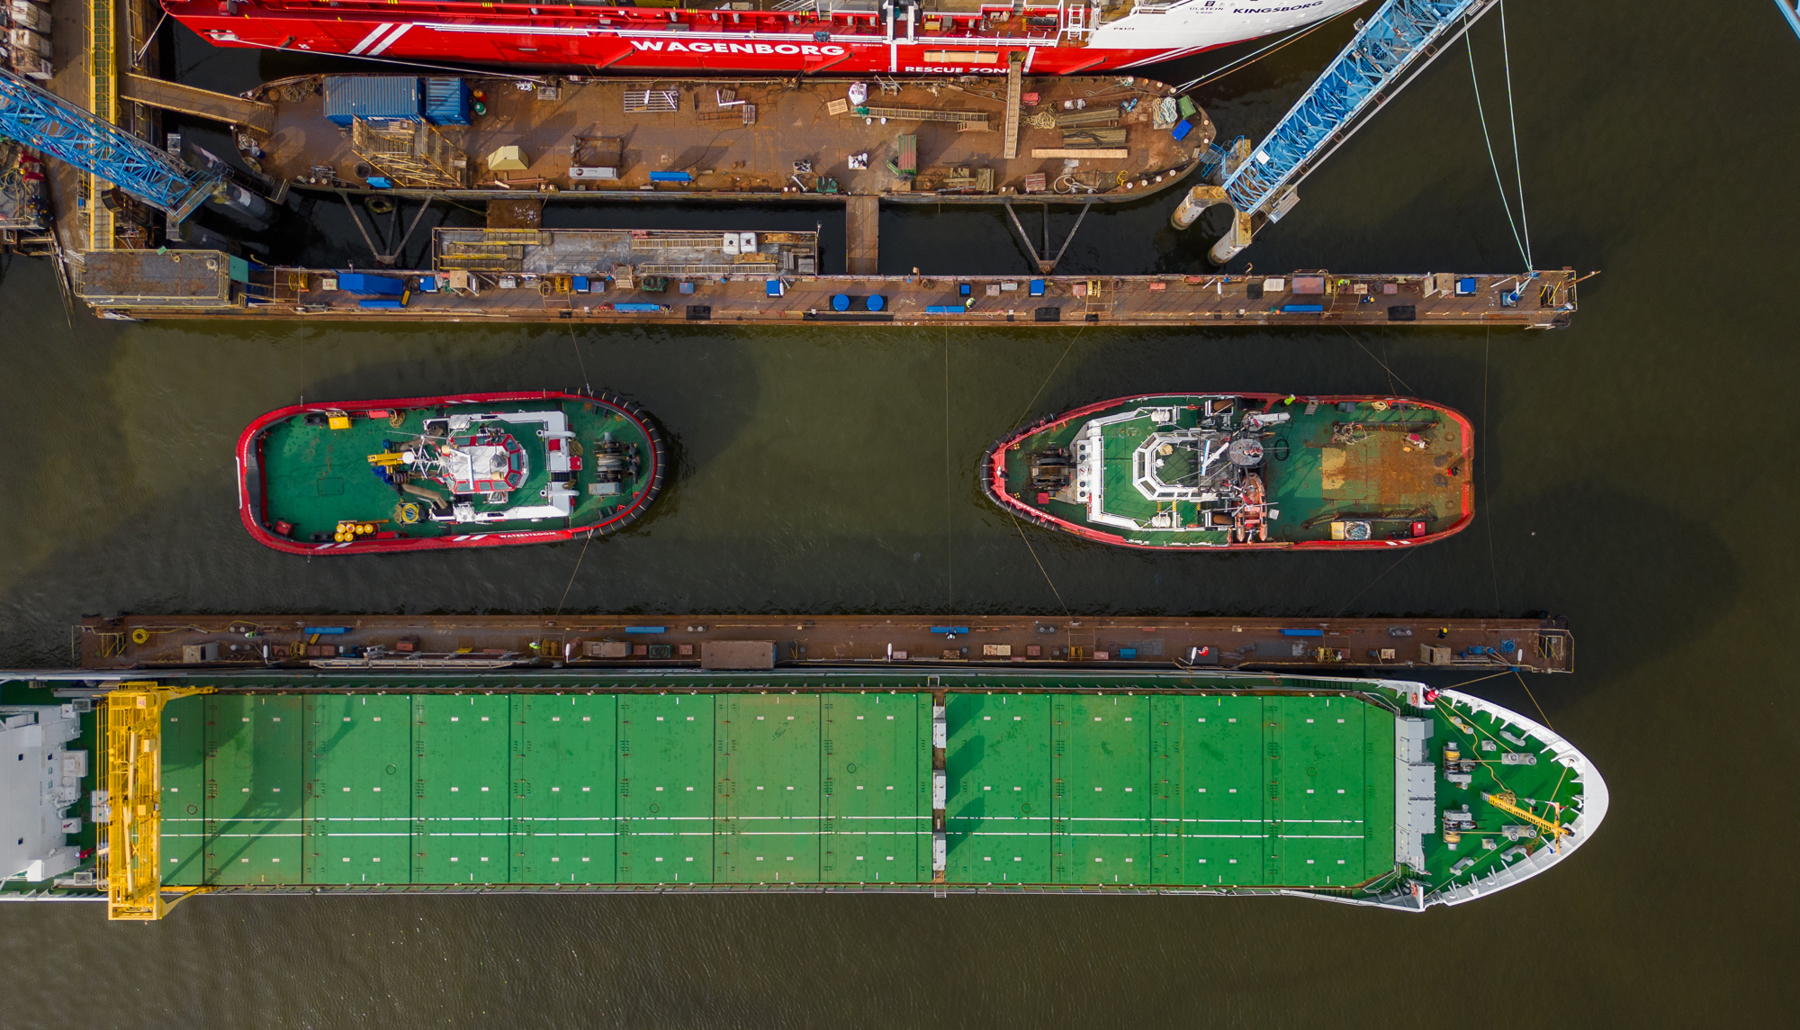 The tugs Waterstroom (left) and Waterman (right) are docked at shipyard Niestern Sander